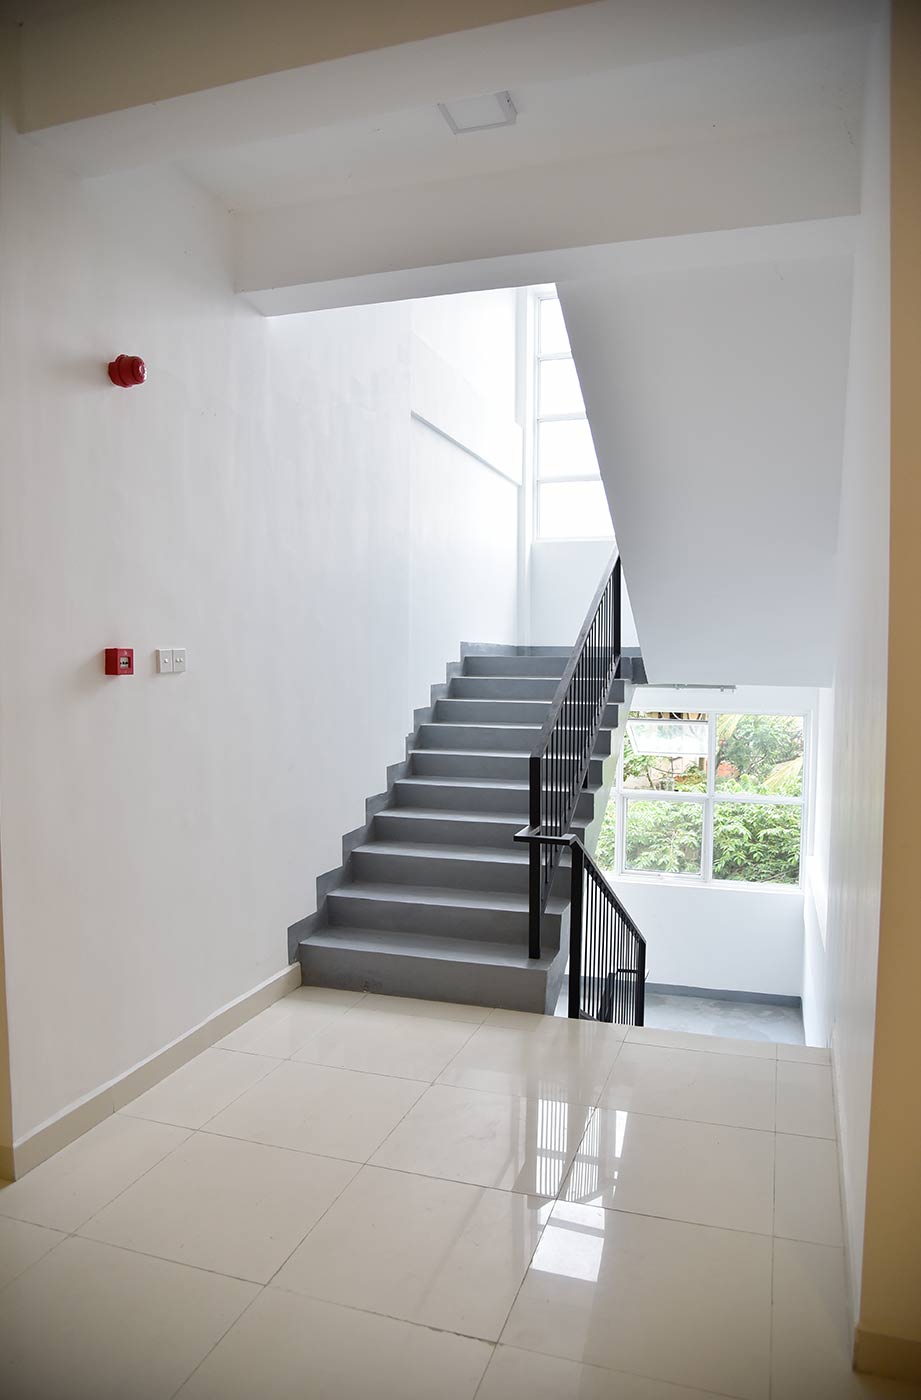 An image of a stairwell